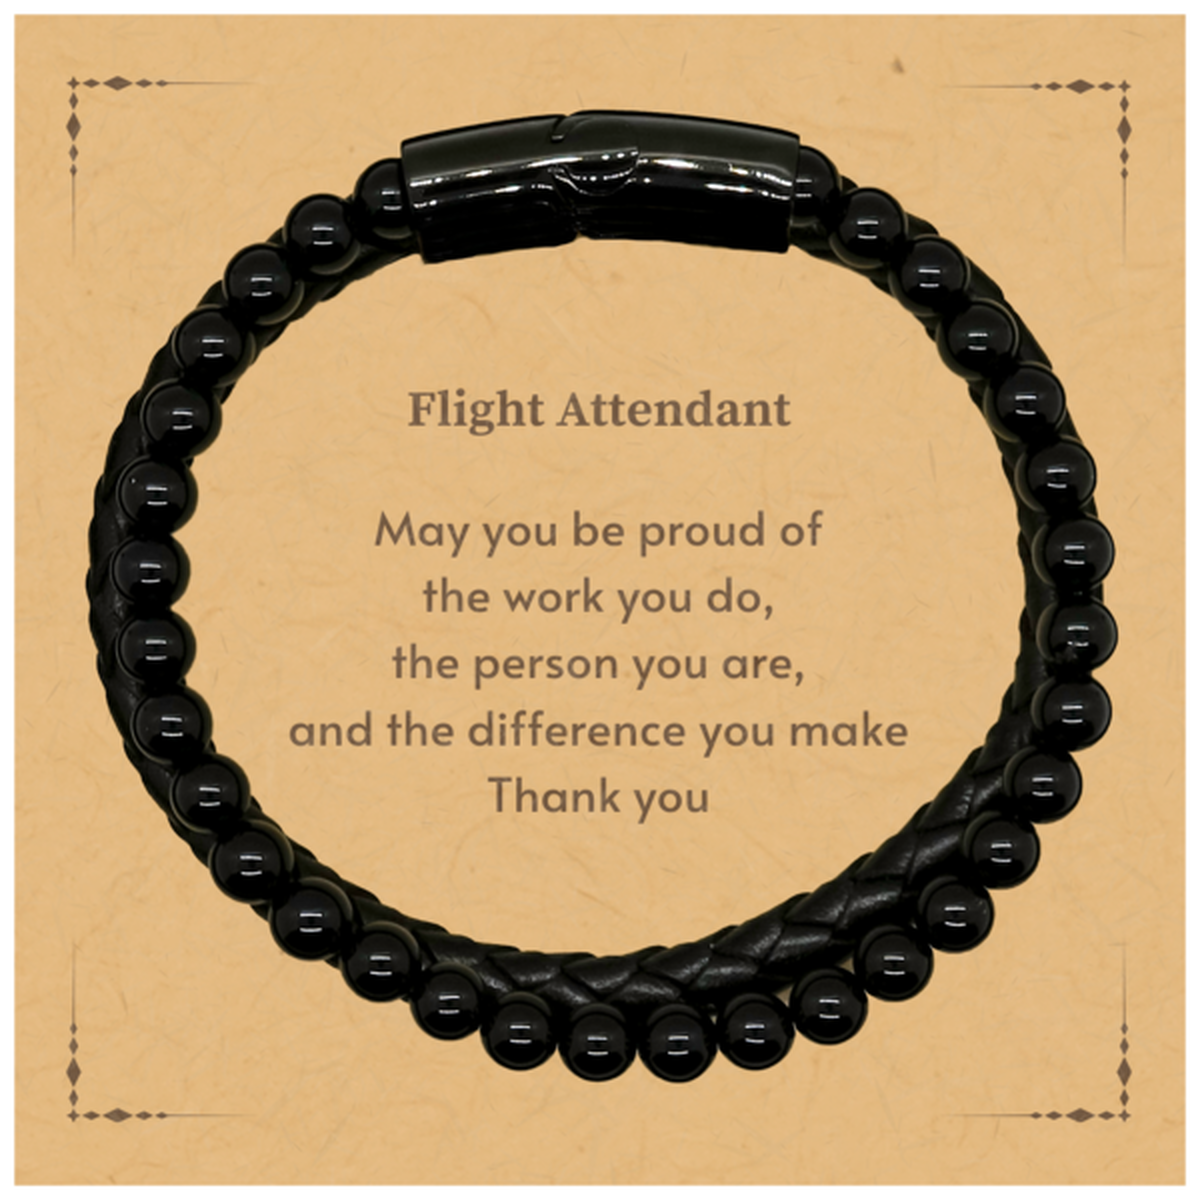 Heartwarming Stone Leather Bracelets Retirement Coworkers Gifts for Flight Attendant, Flight Attendant May You be proud of the work you do, the person you are Gifts for Boss Men Women Friends